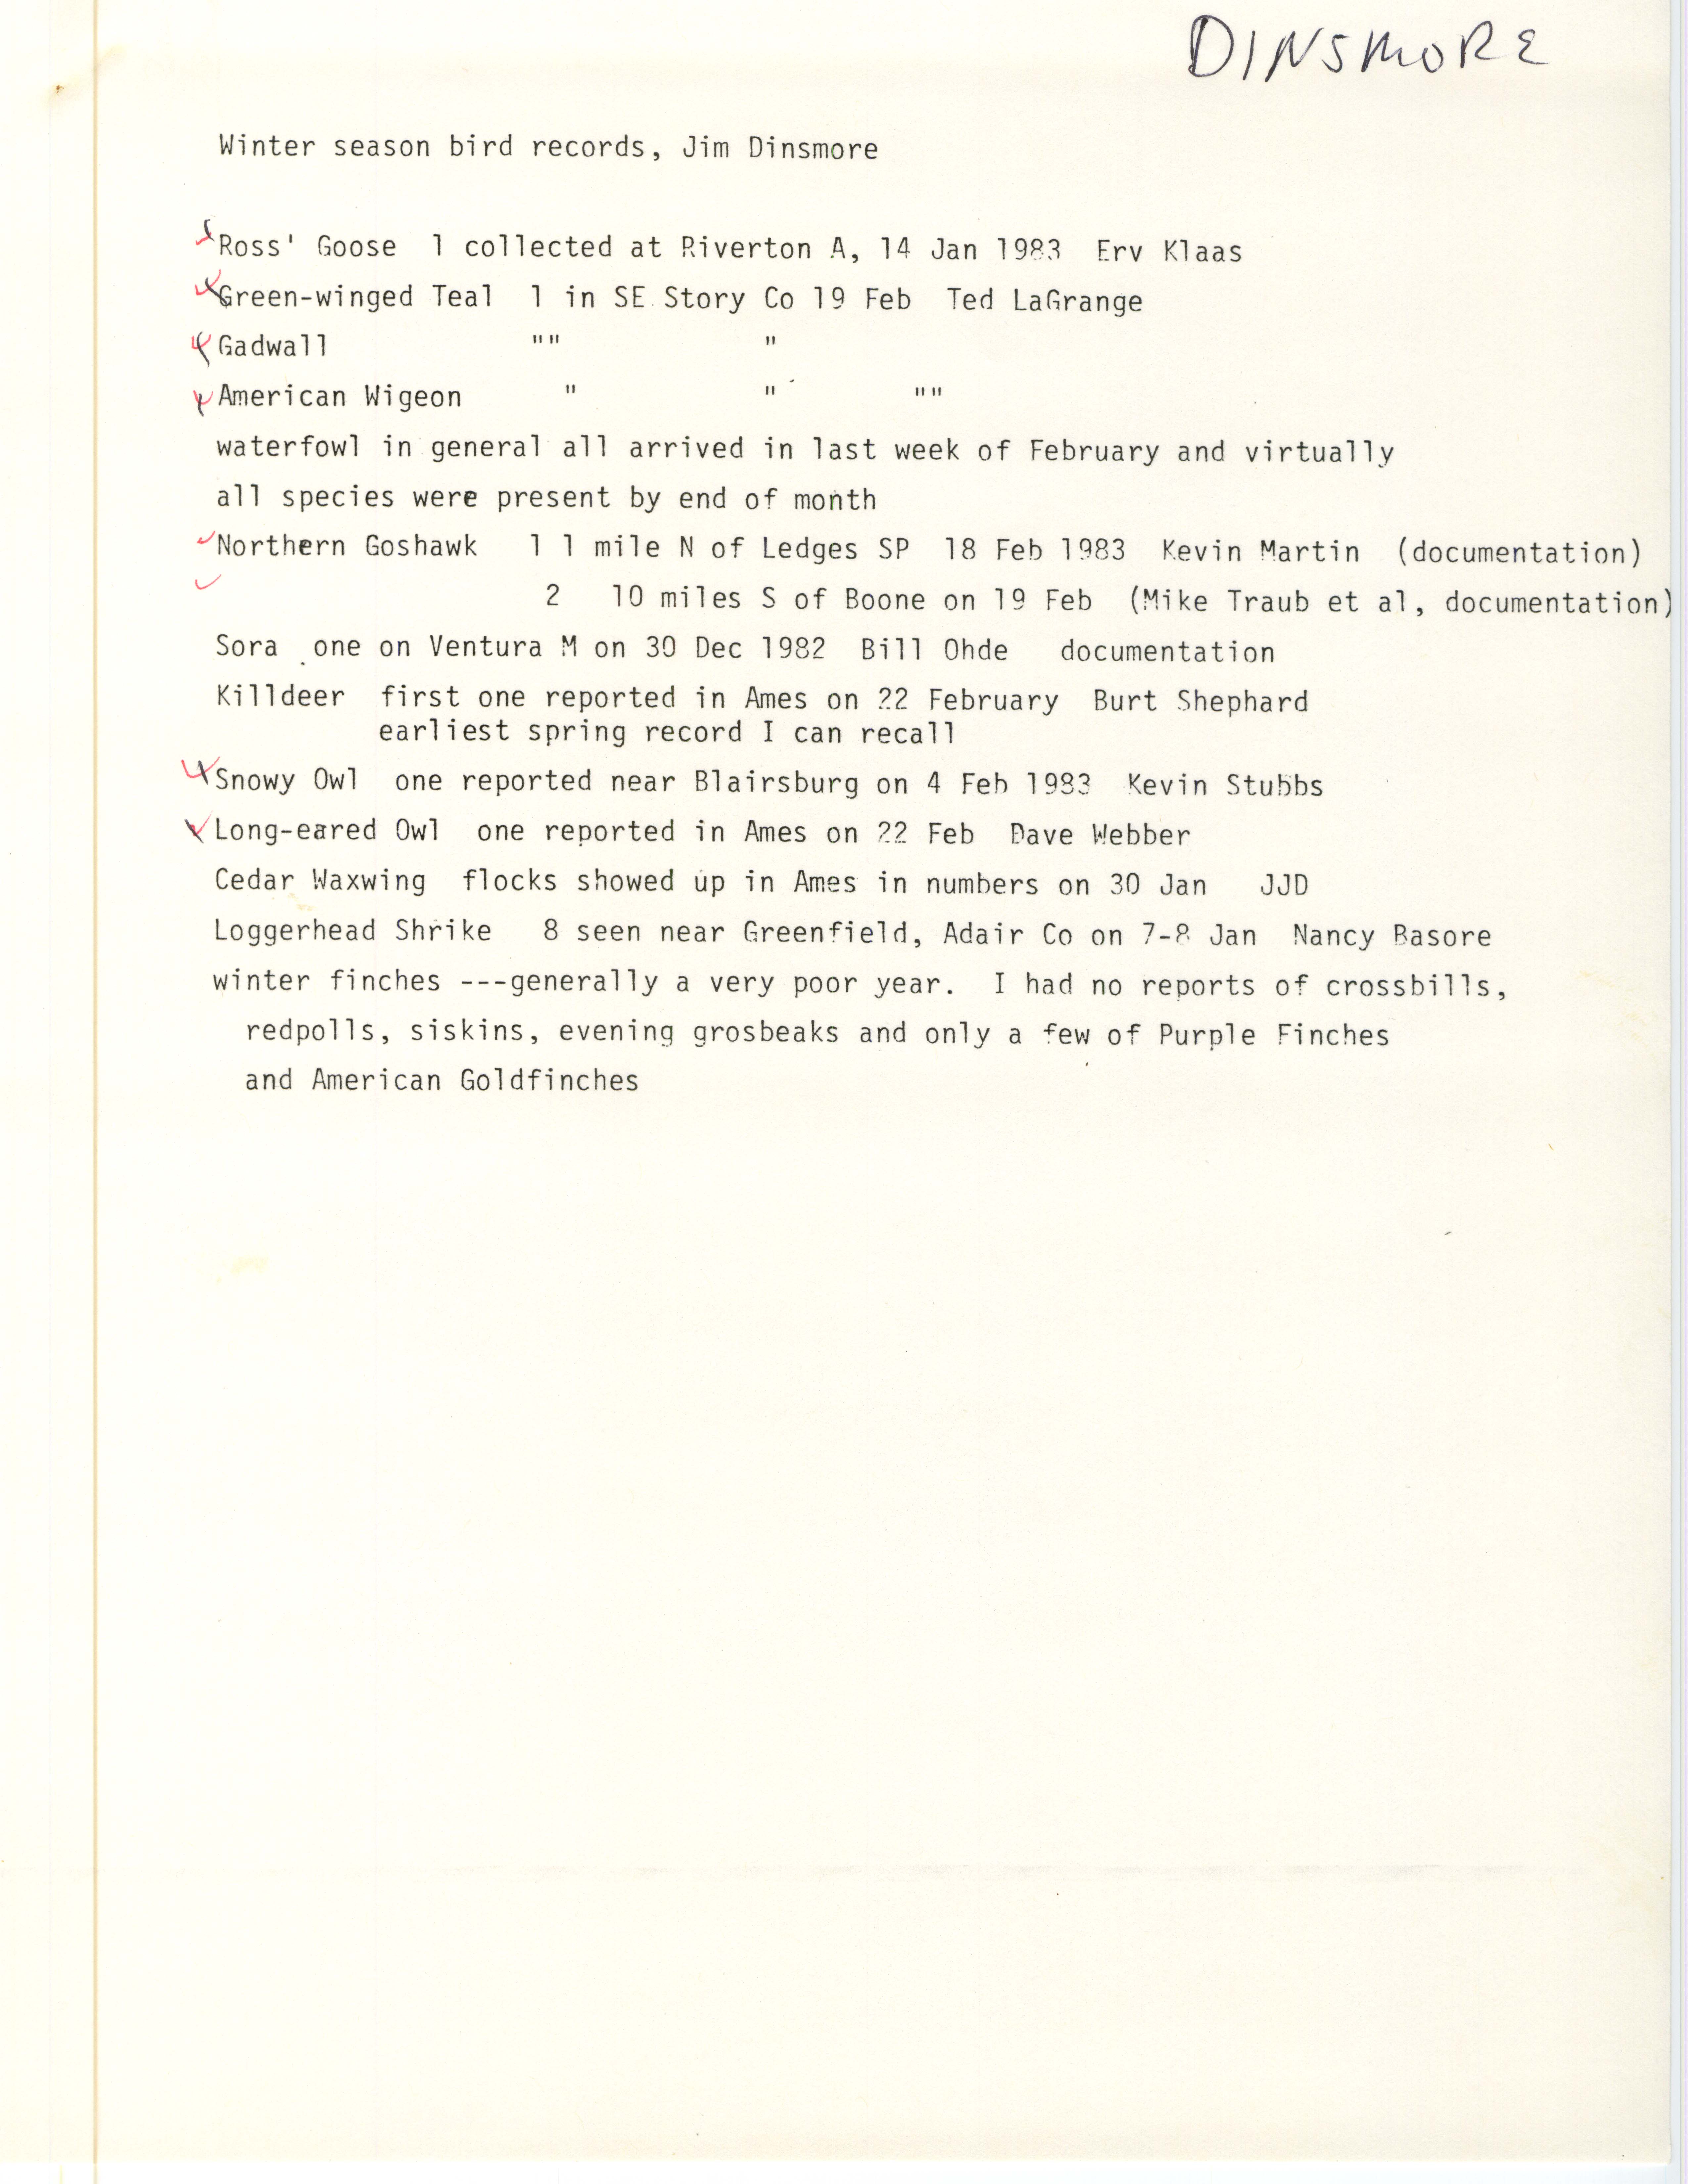 Field notes contributed by James J. Dinsmore, winter 1982-1983